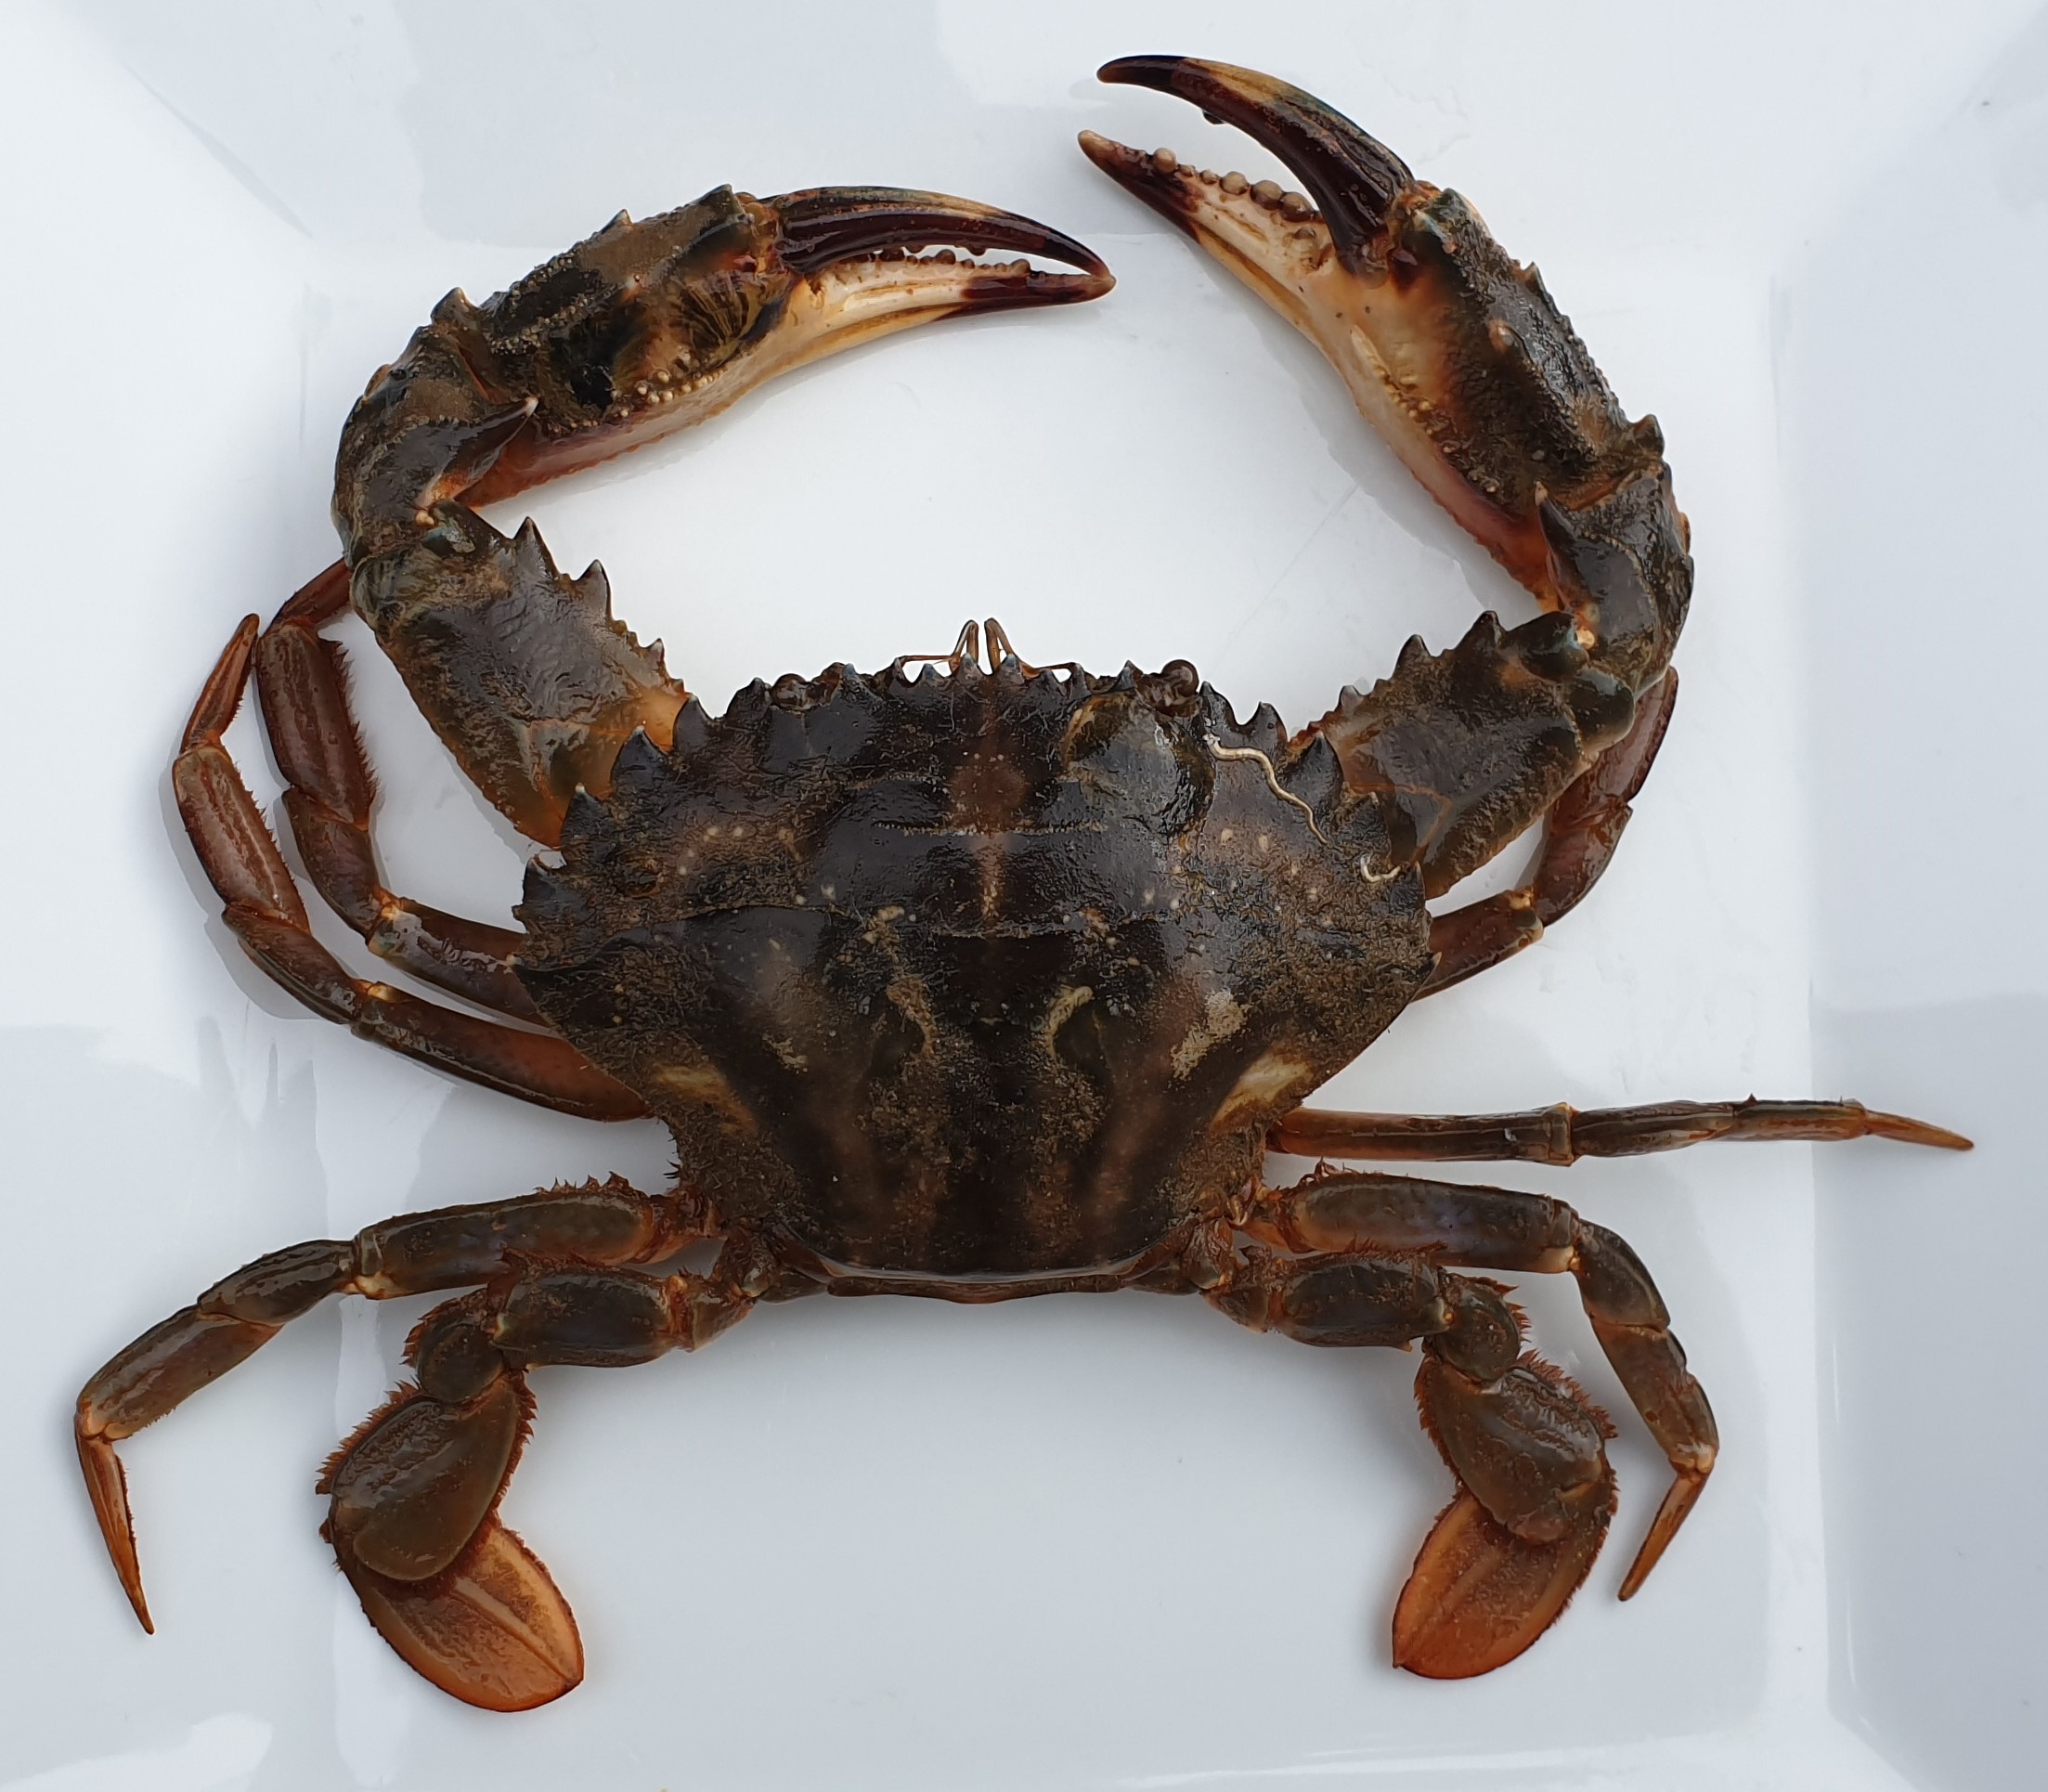 Image of Asian paddle crab. The scientific name, Charybdis japonica. This image was taken by A. Chalupa